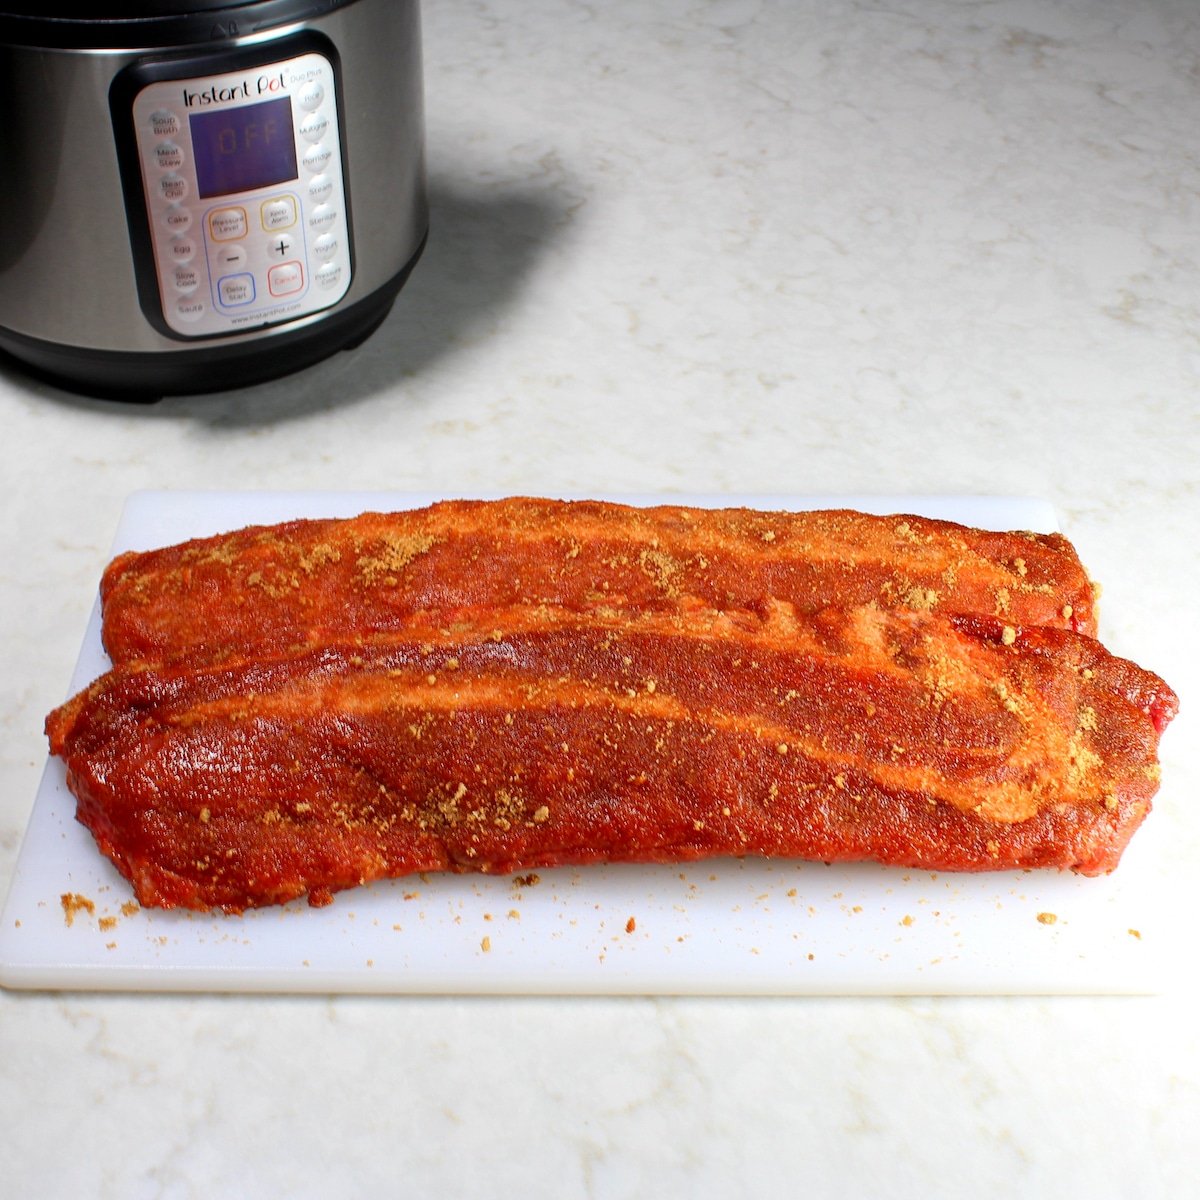 Rib with spices and seasonings rubbed onto the meat.